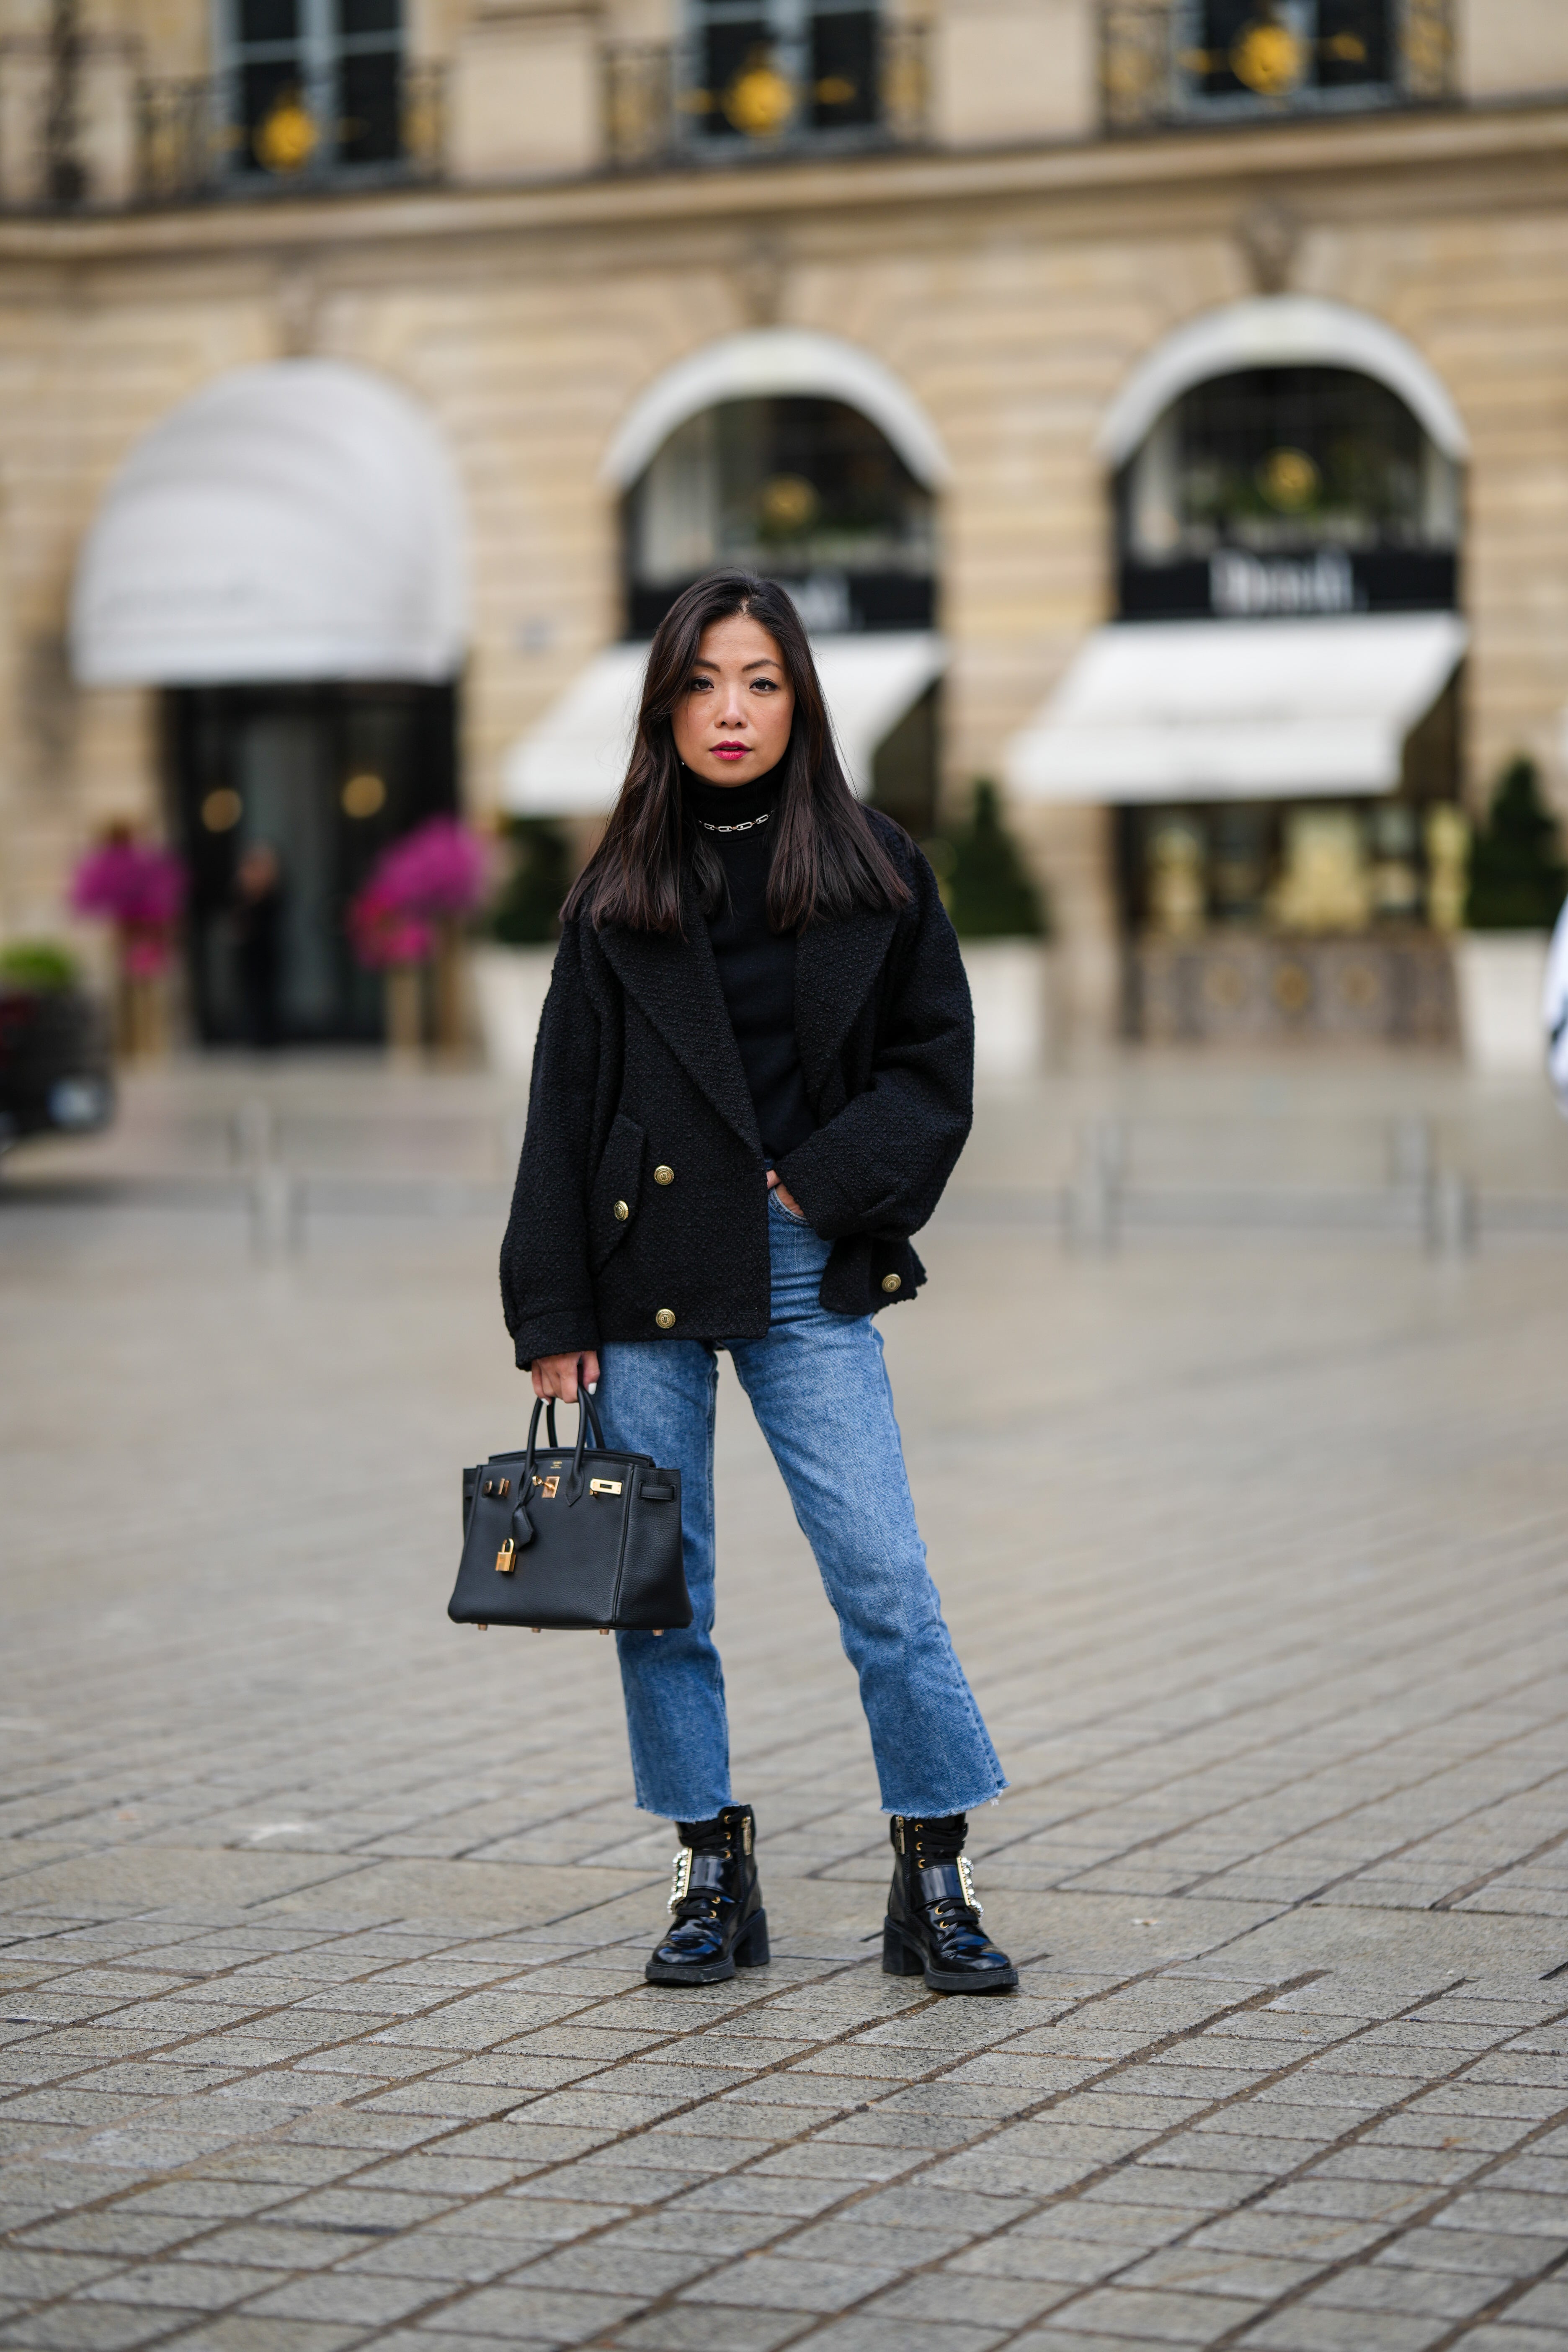 How to Style Wide Leg Jeans With Boots